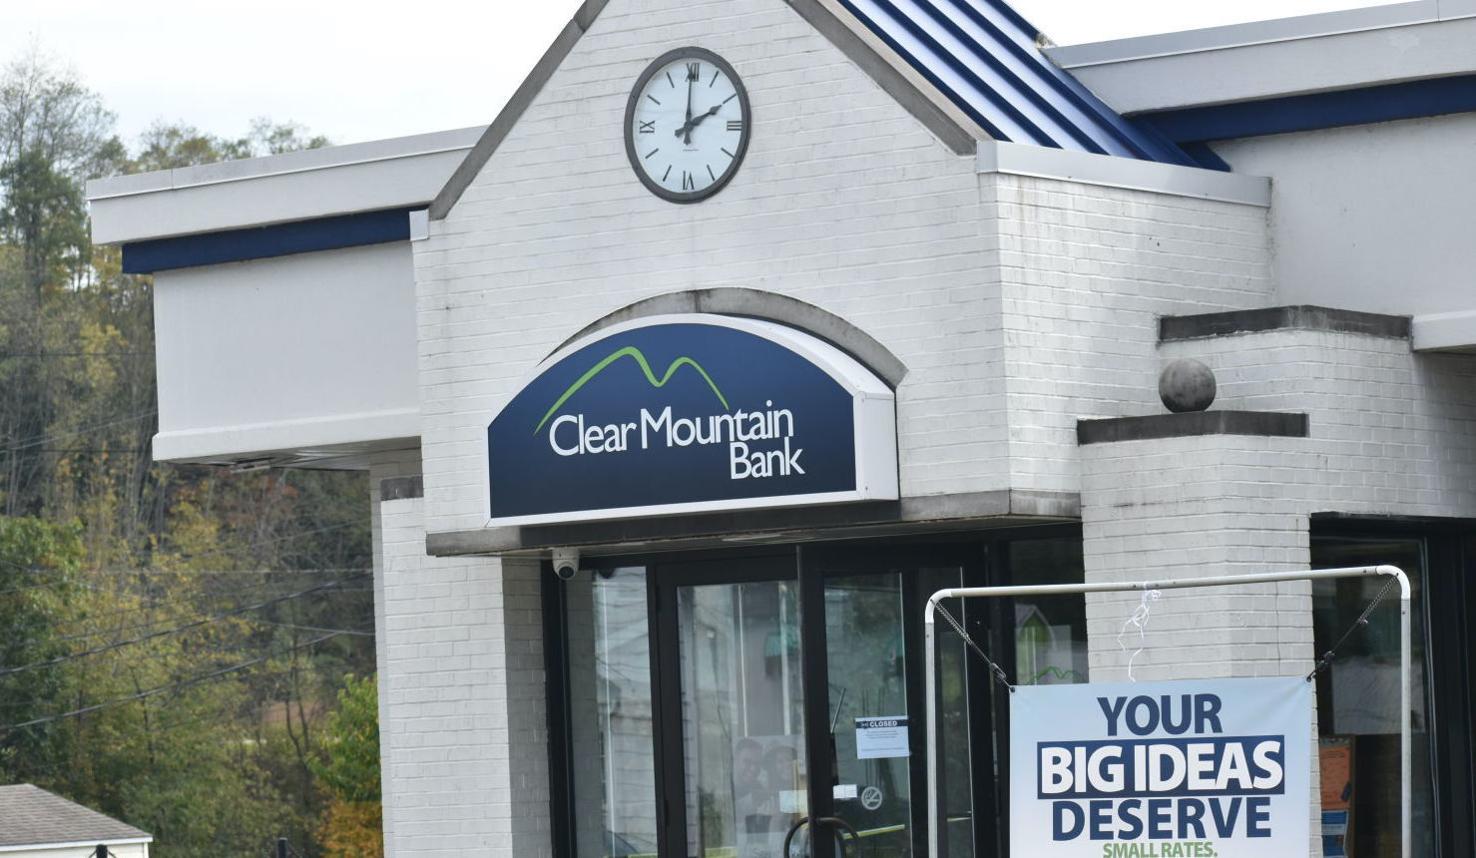 Clear Mountain Bank named one of the best banks to work for in the